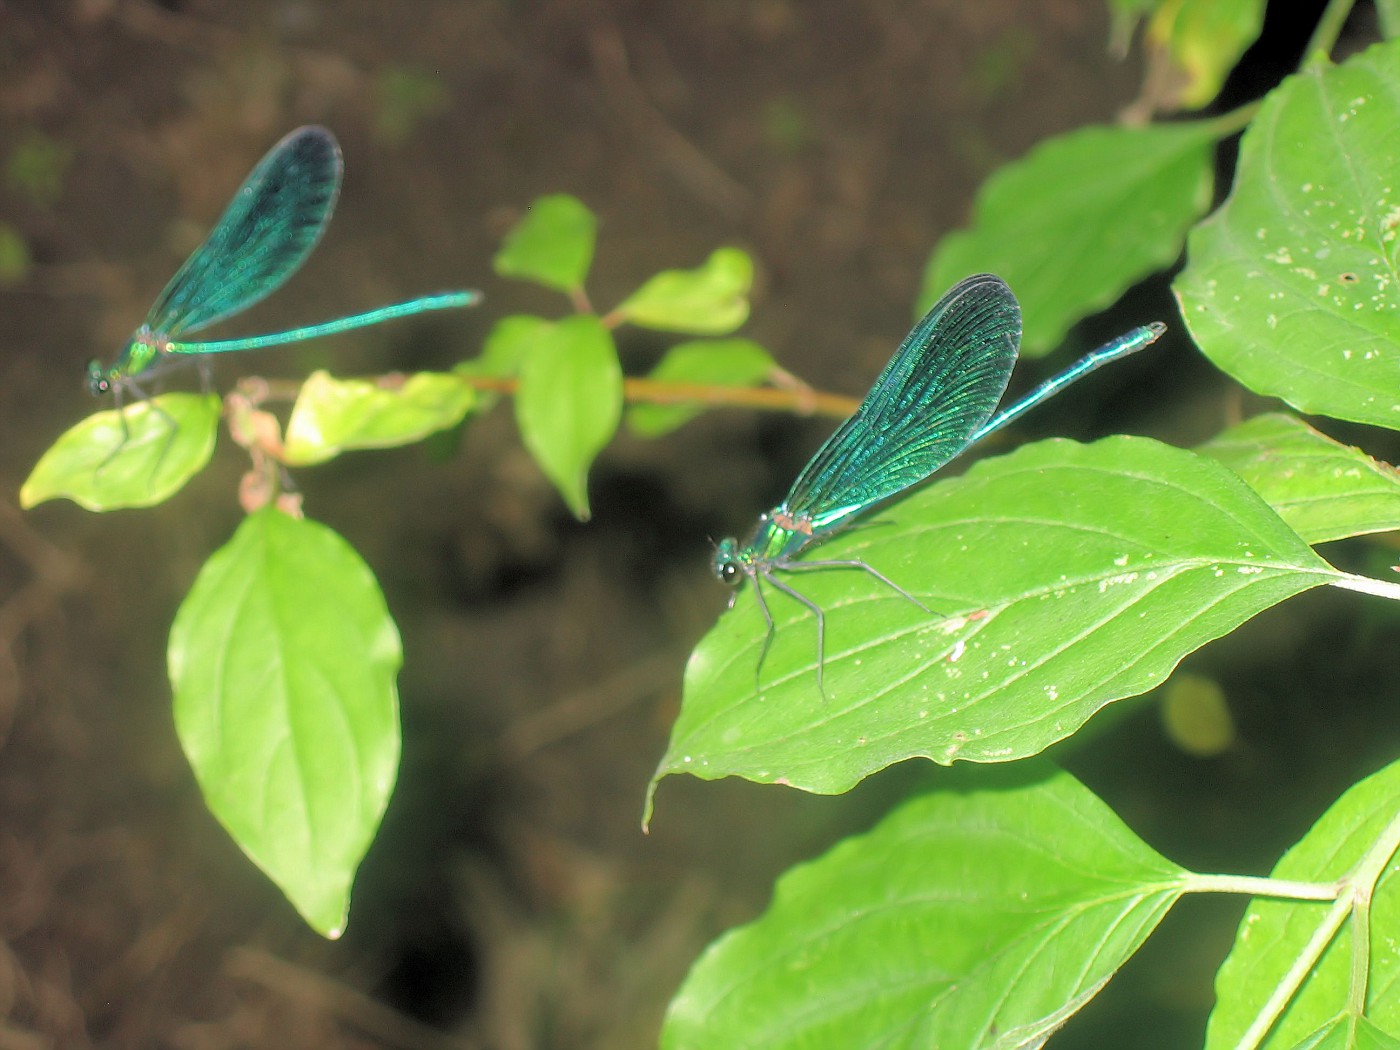 Two Dragonflies #1